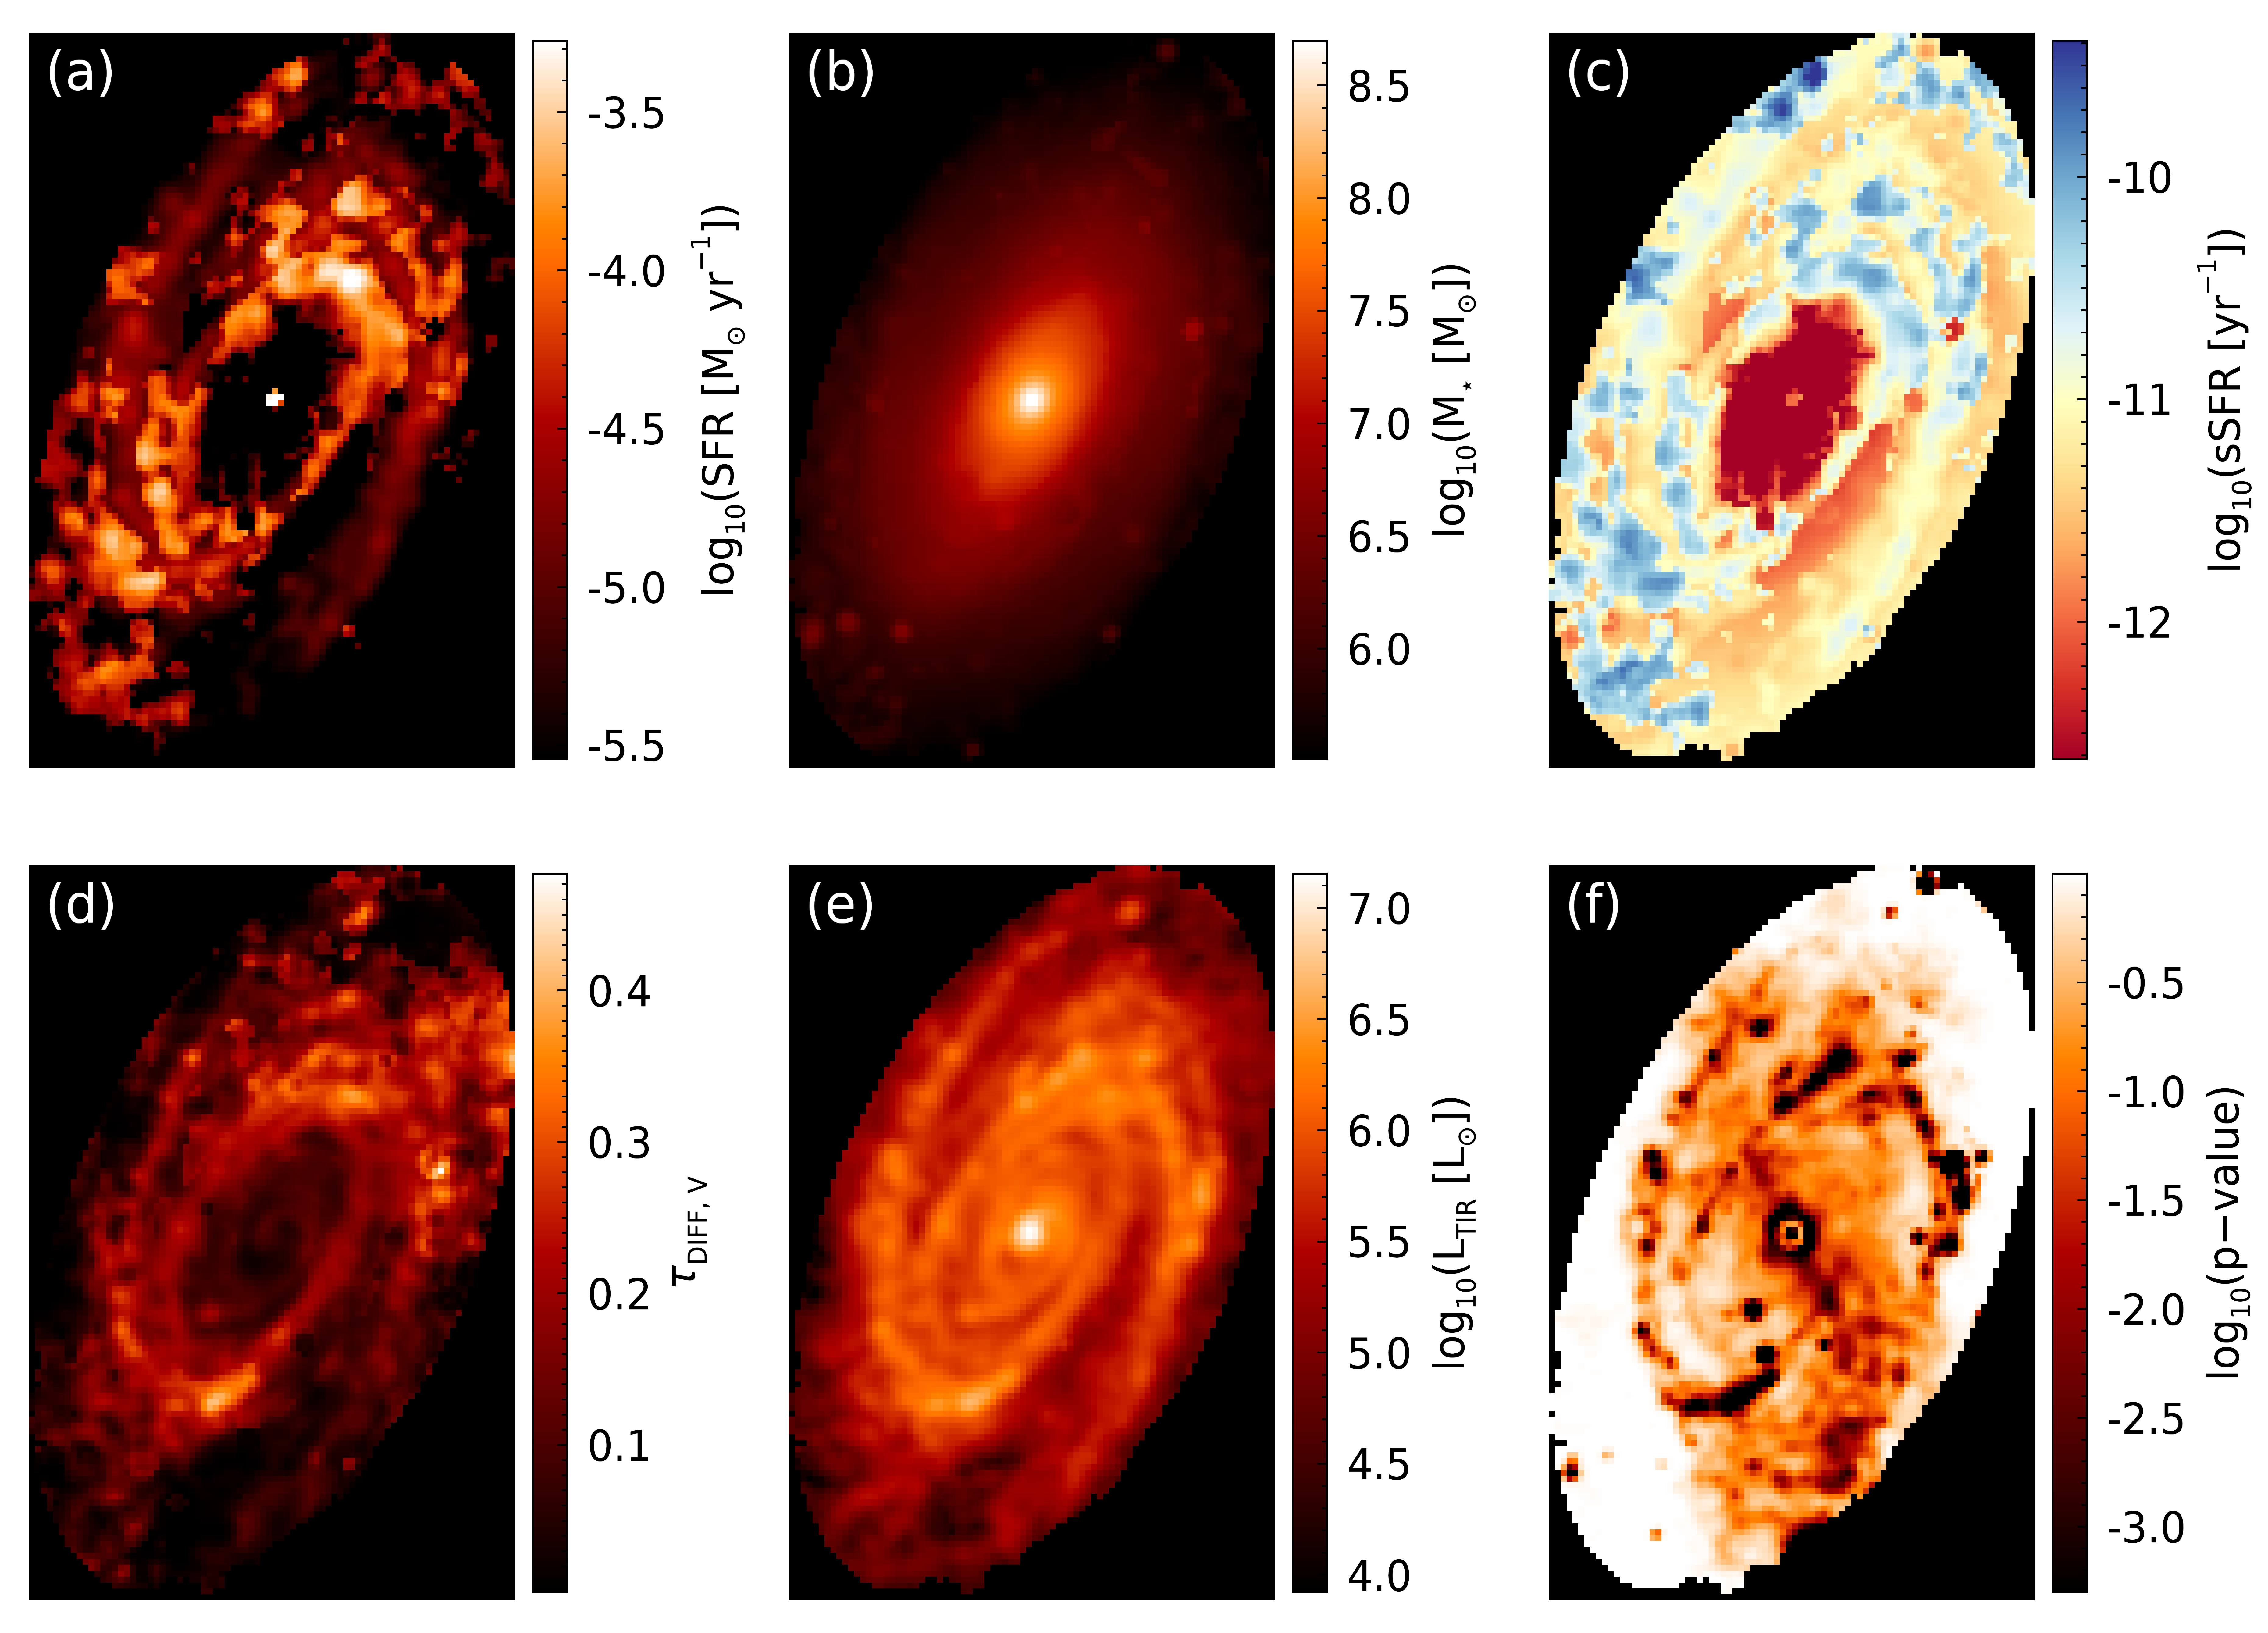 maps of the derived spatially resolved properties of M81 using the MPFIT algorithm.